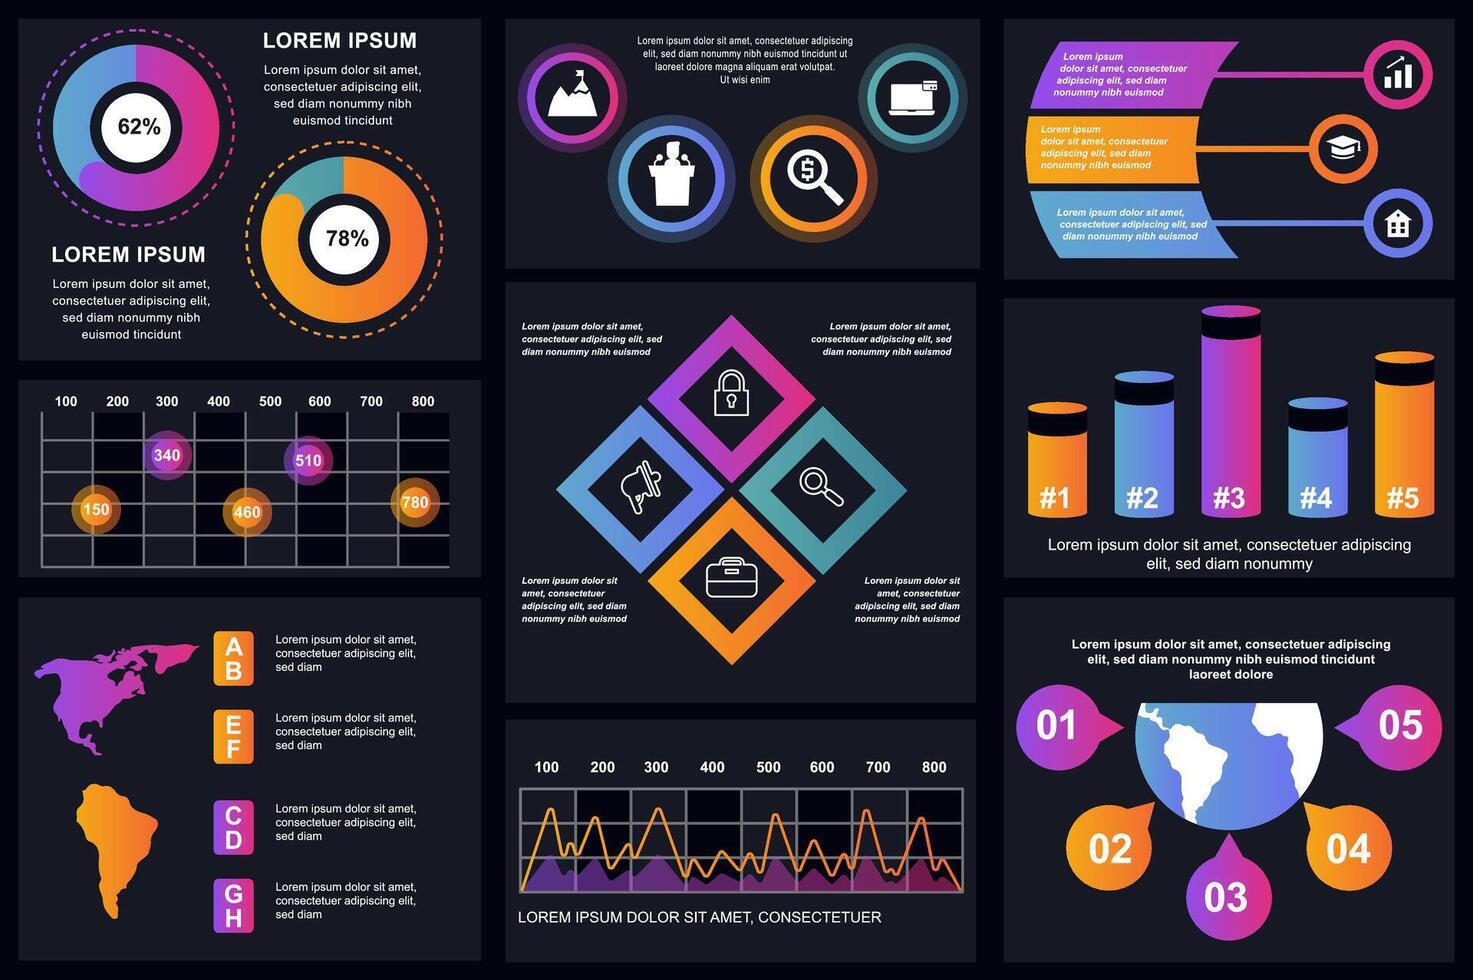 Set of infographic elements data visualization vector design template. Can be used for steps, options, business process, workflow, diagram, flowchart concept, timeline, marketing icons, info graphics.